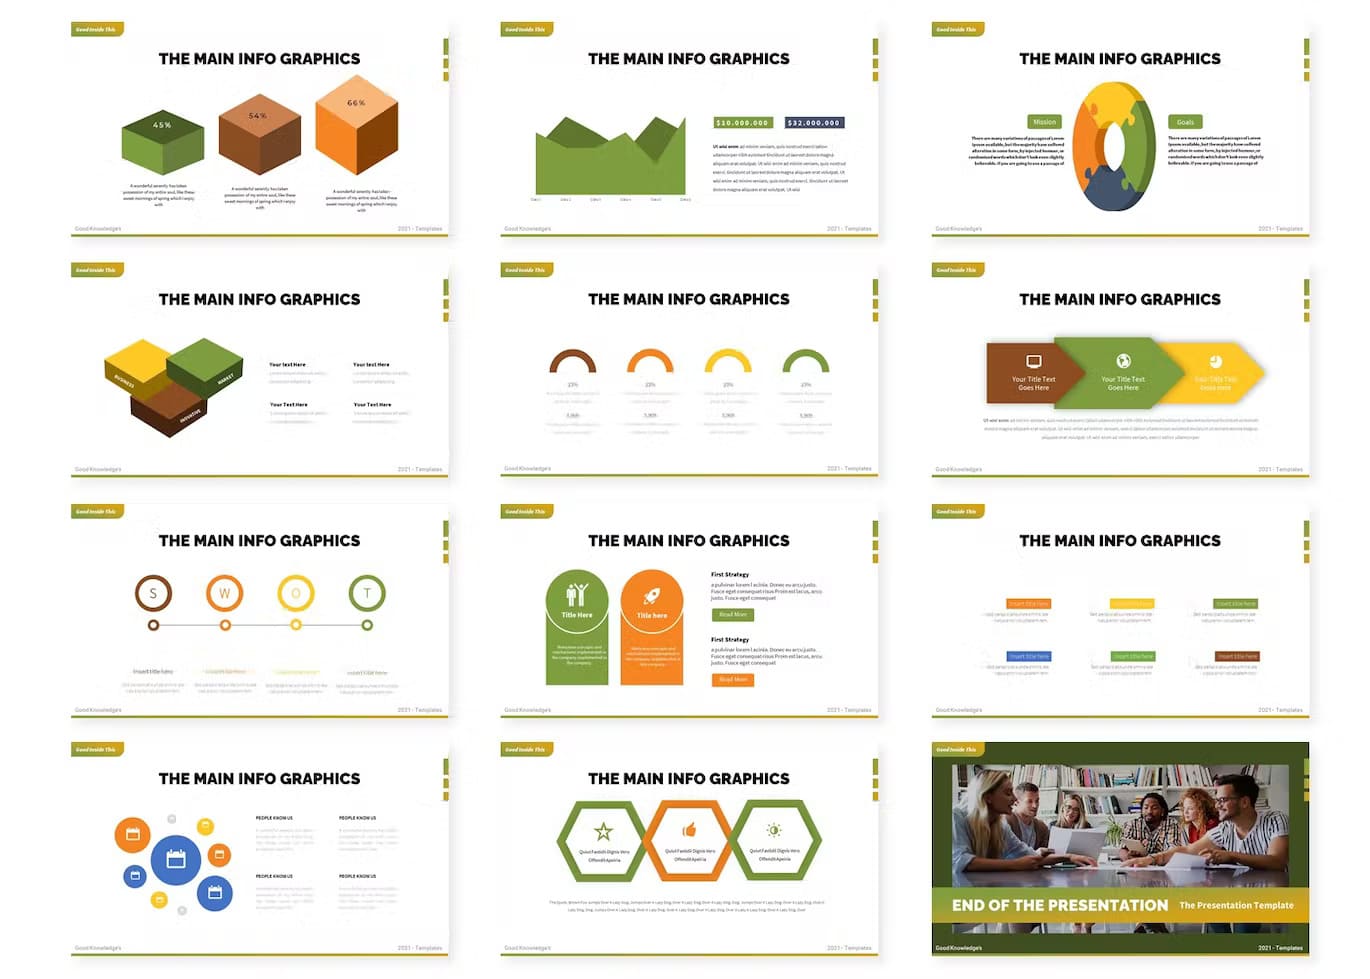 Google Slides for Business Planning - the main infographics.